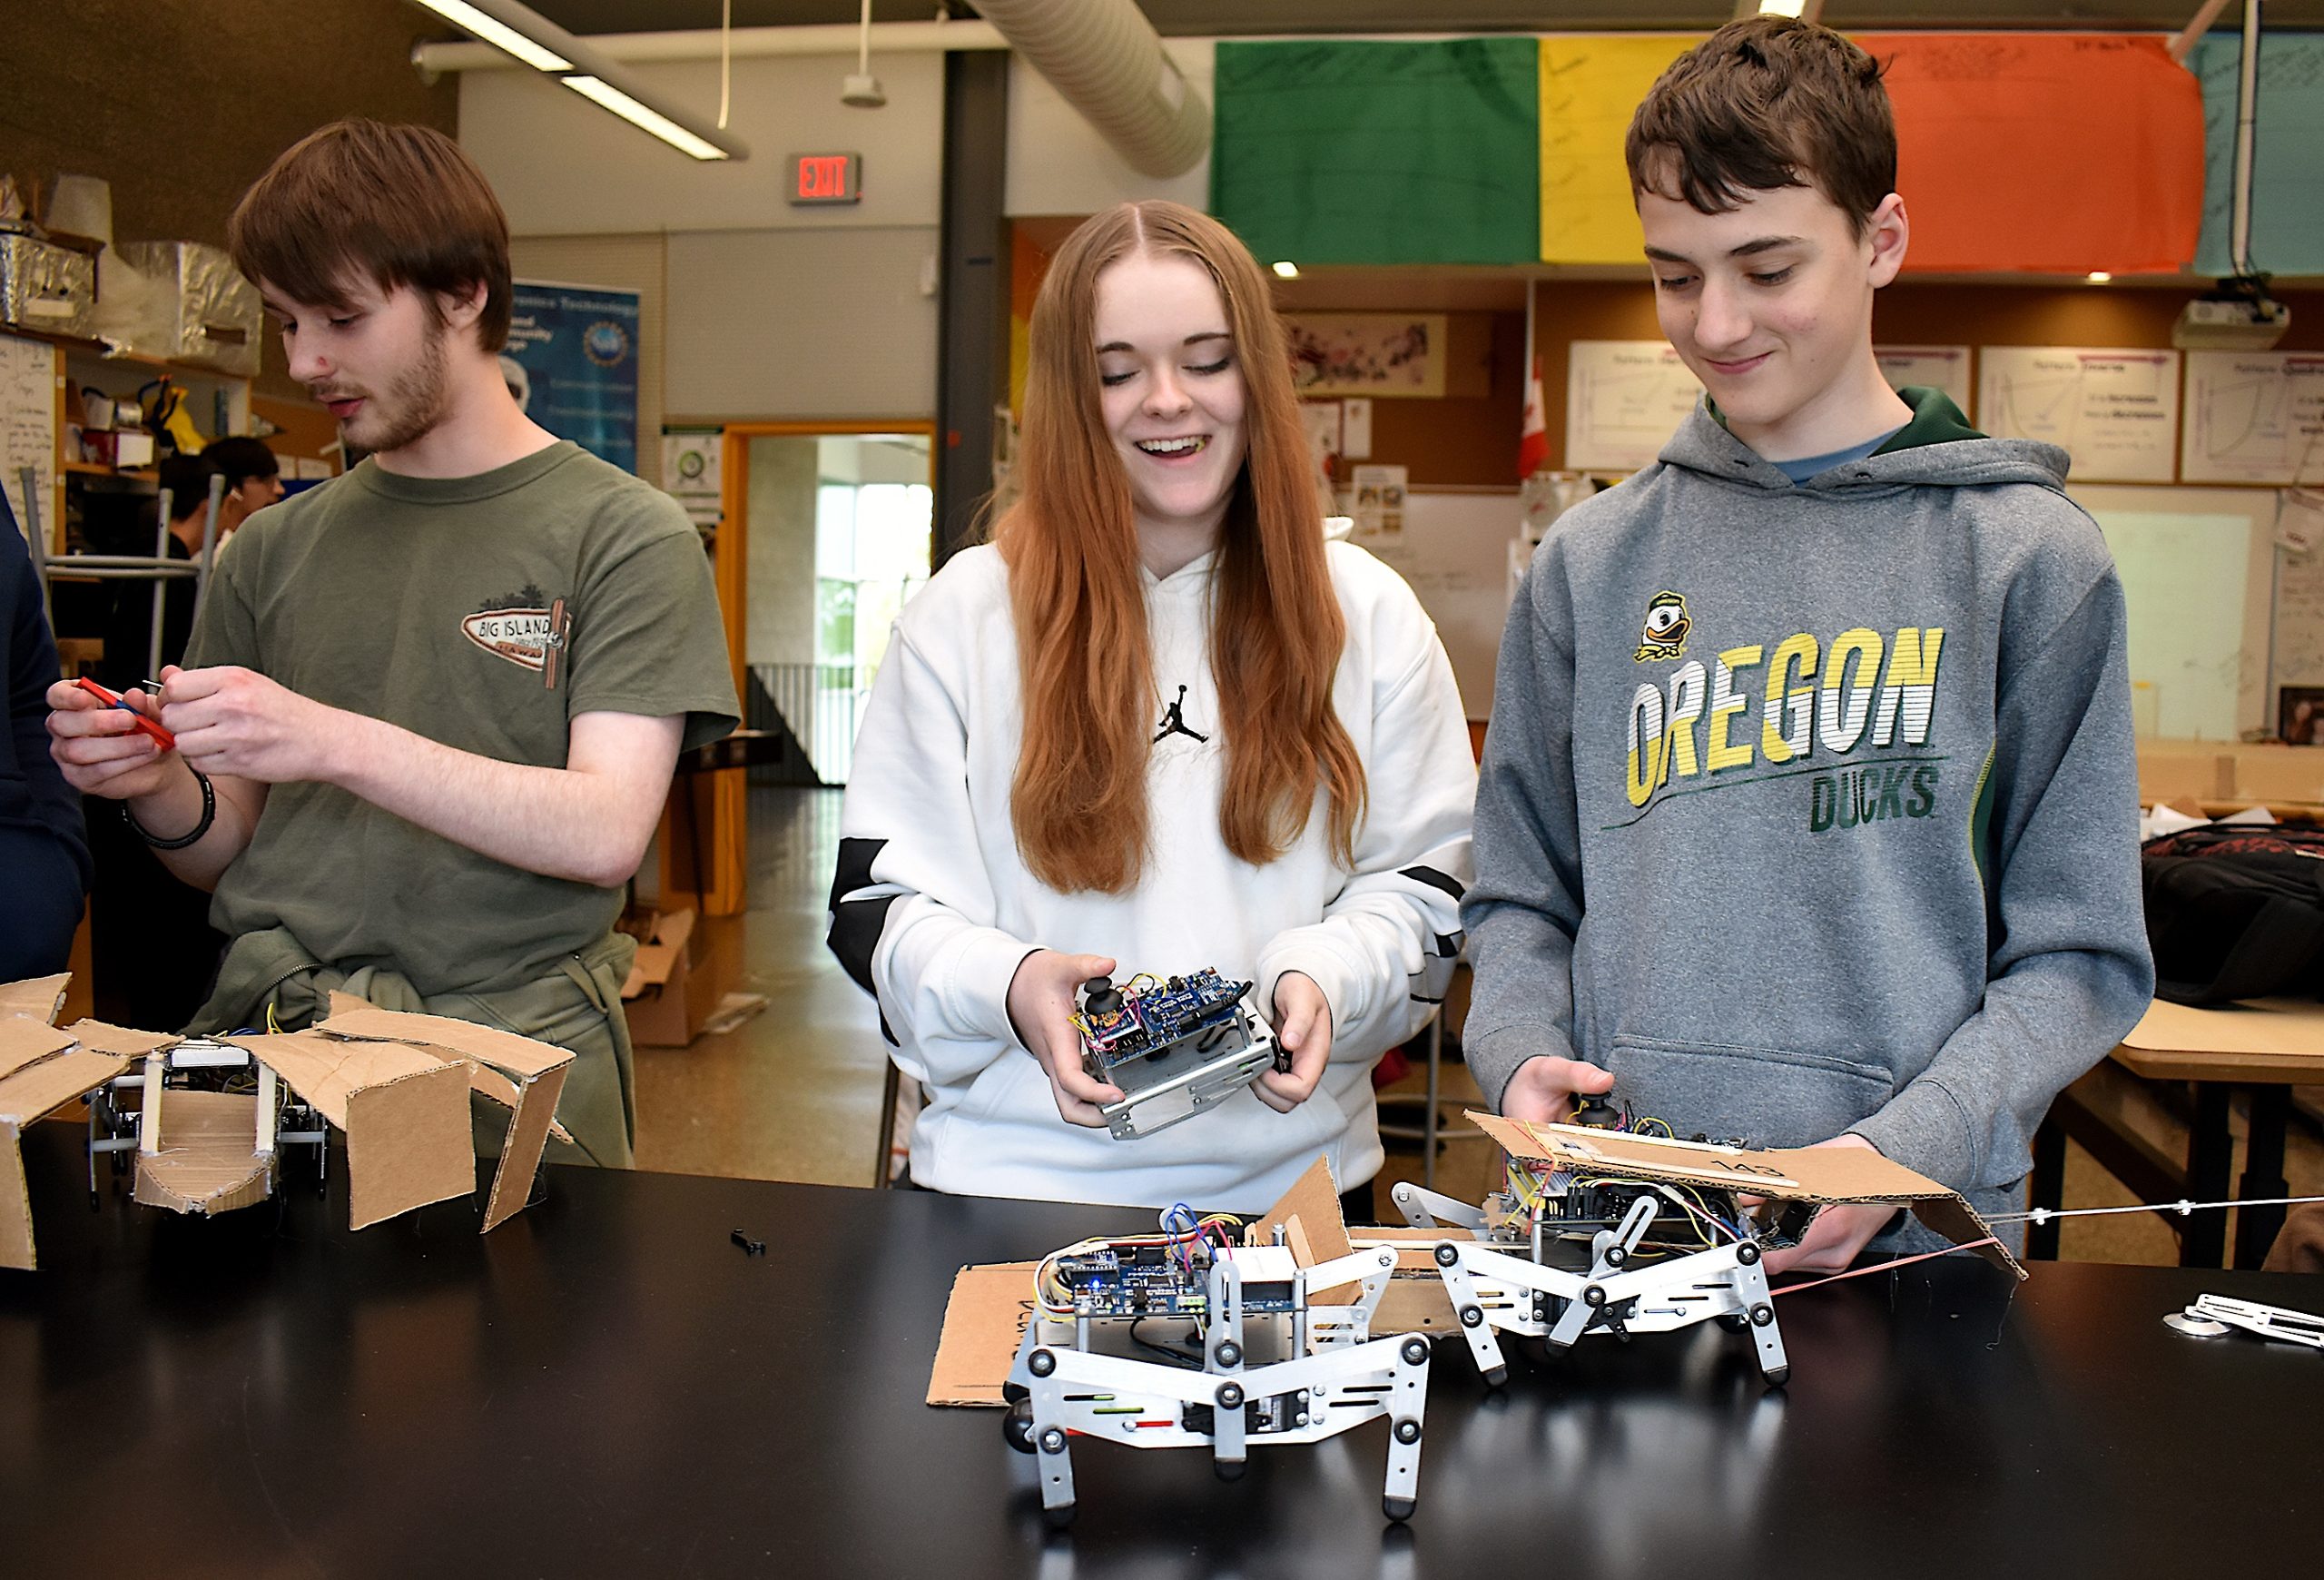 Forest Grove students building robots.